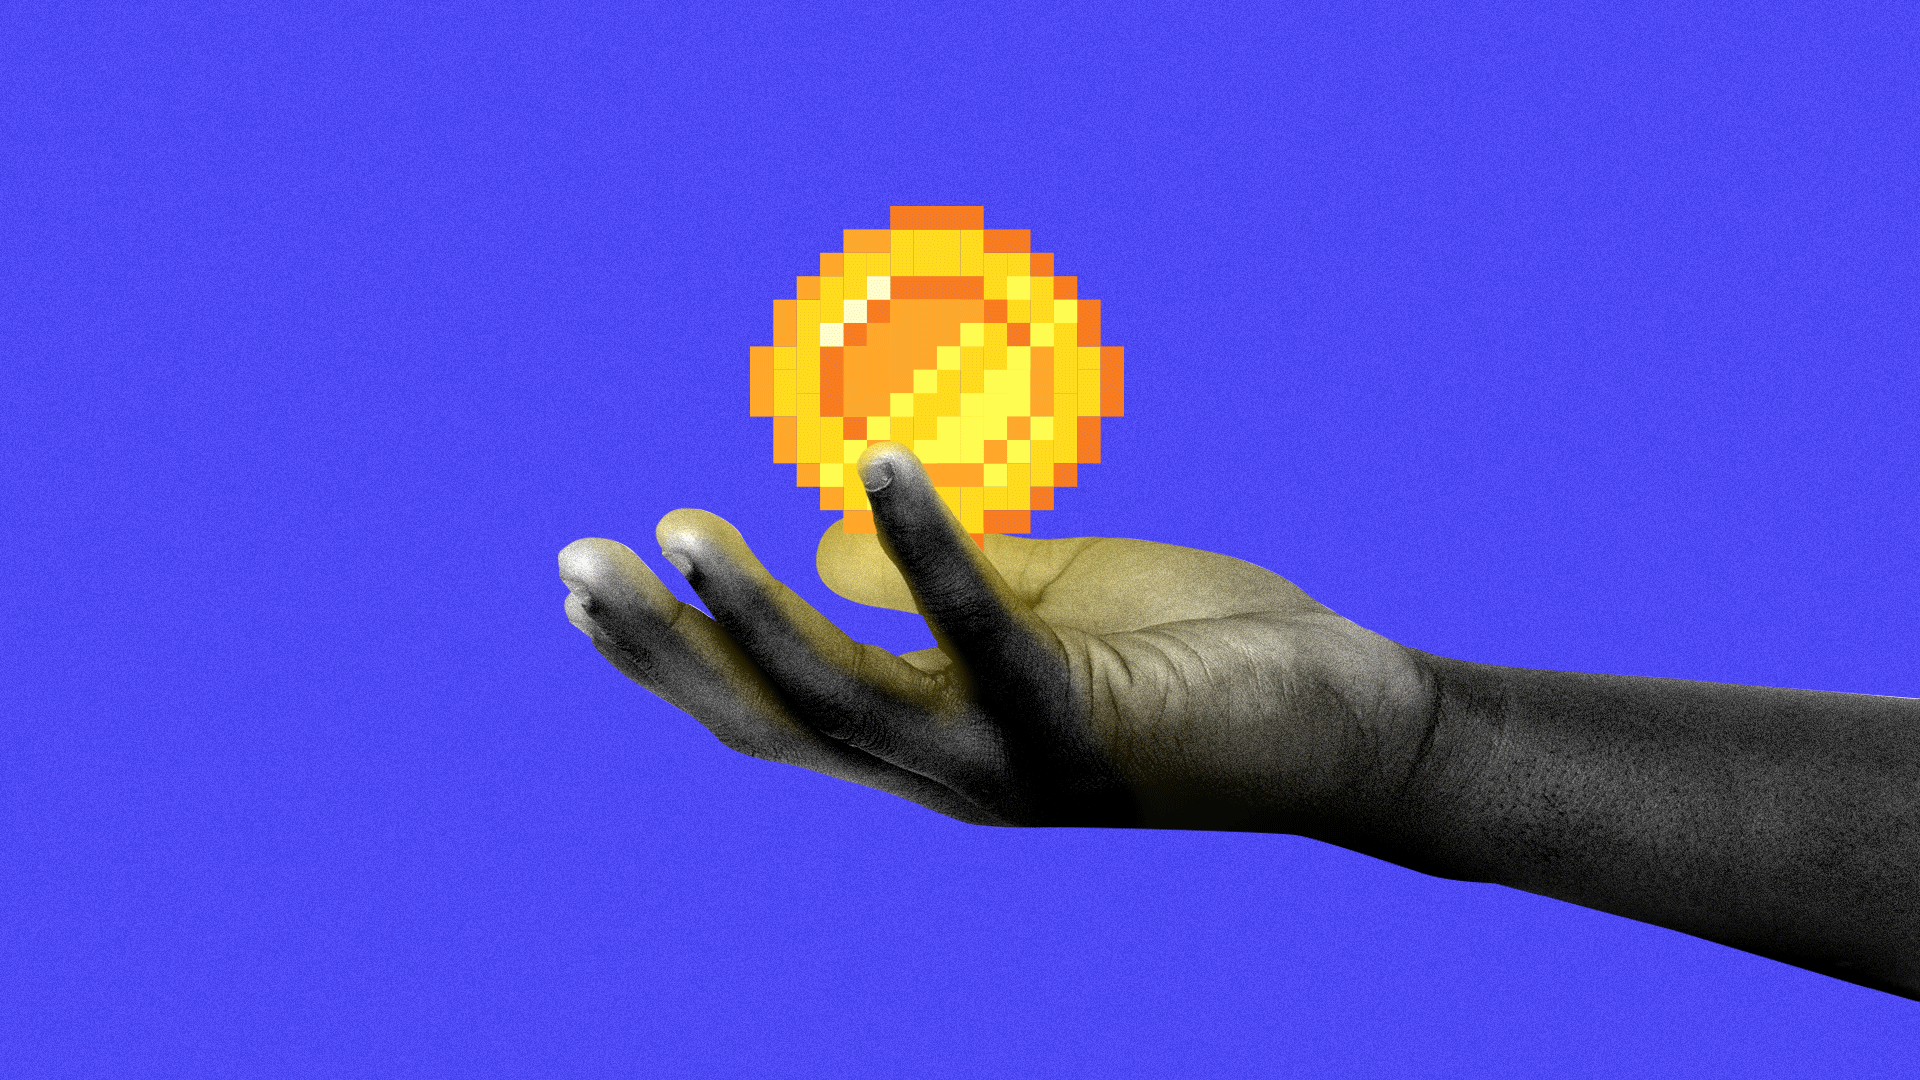 Animated illustration of a hand holding a rotating glowing golden pixel coin